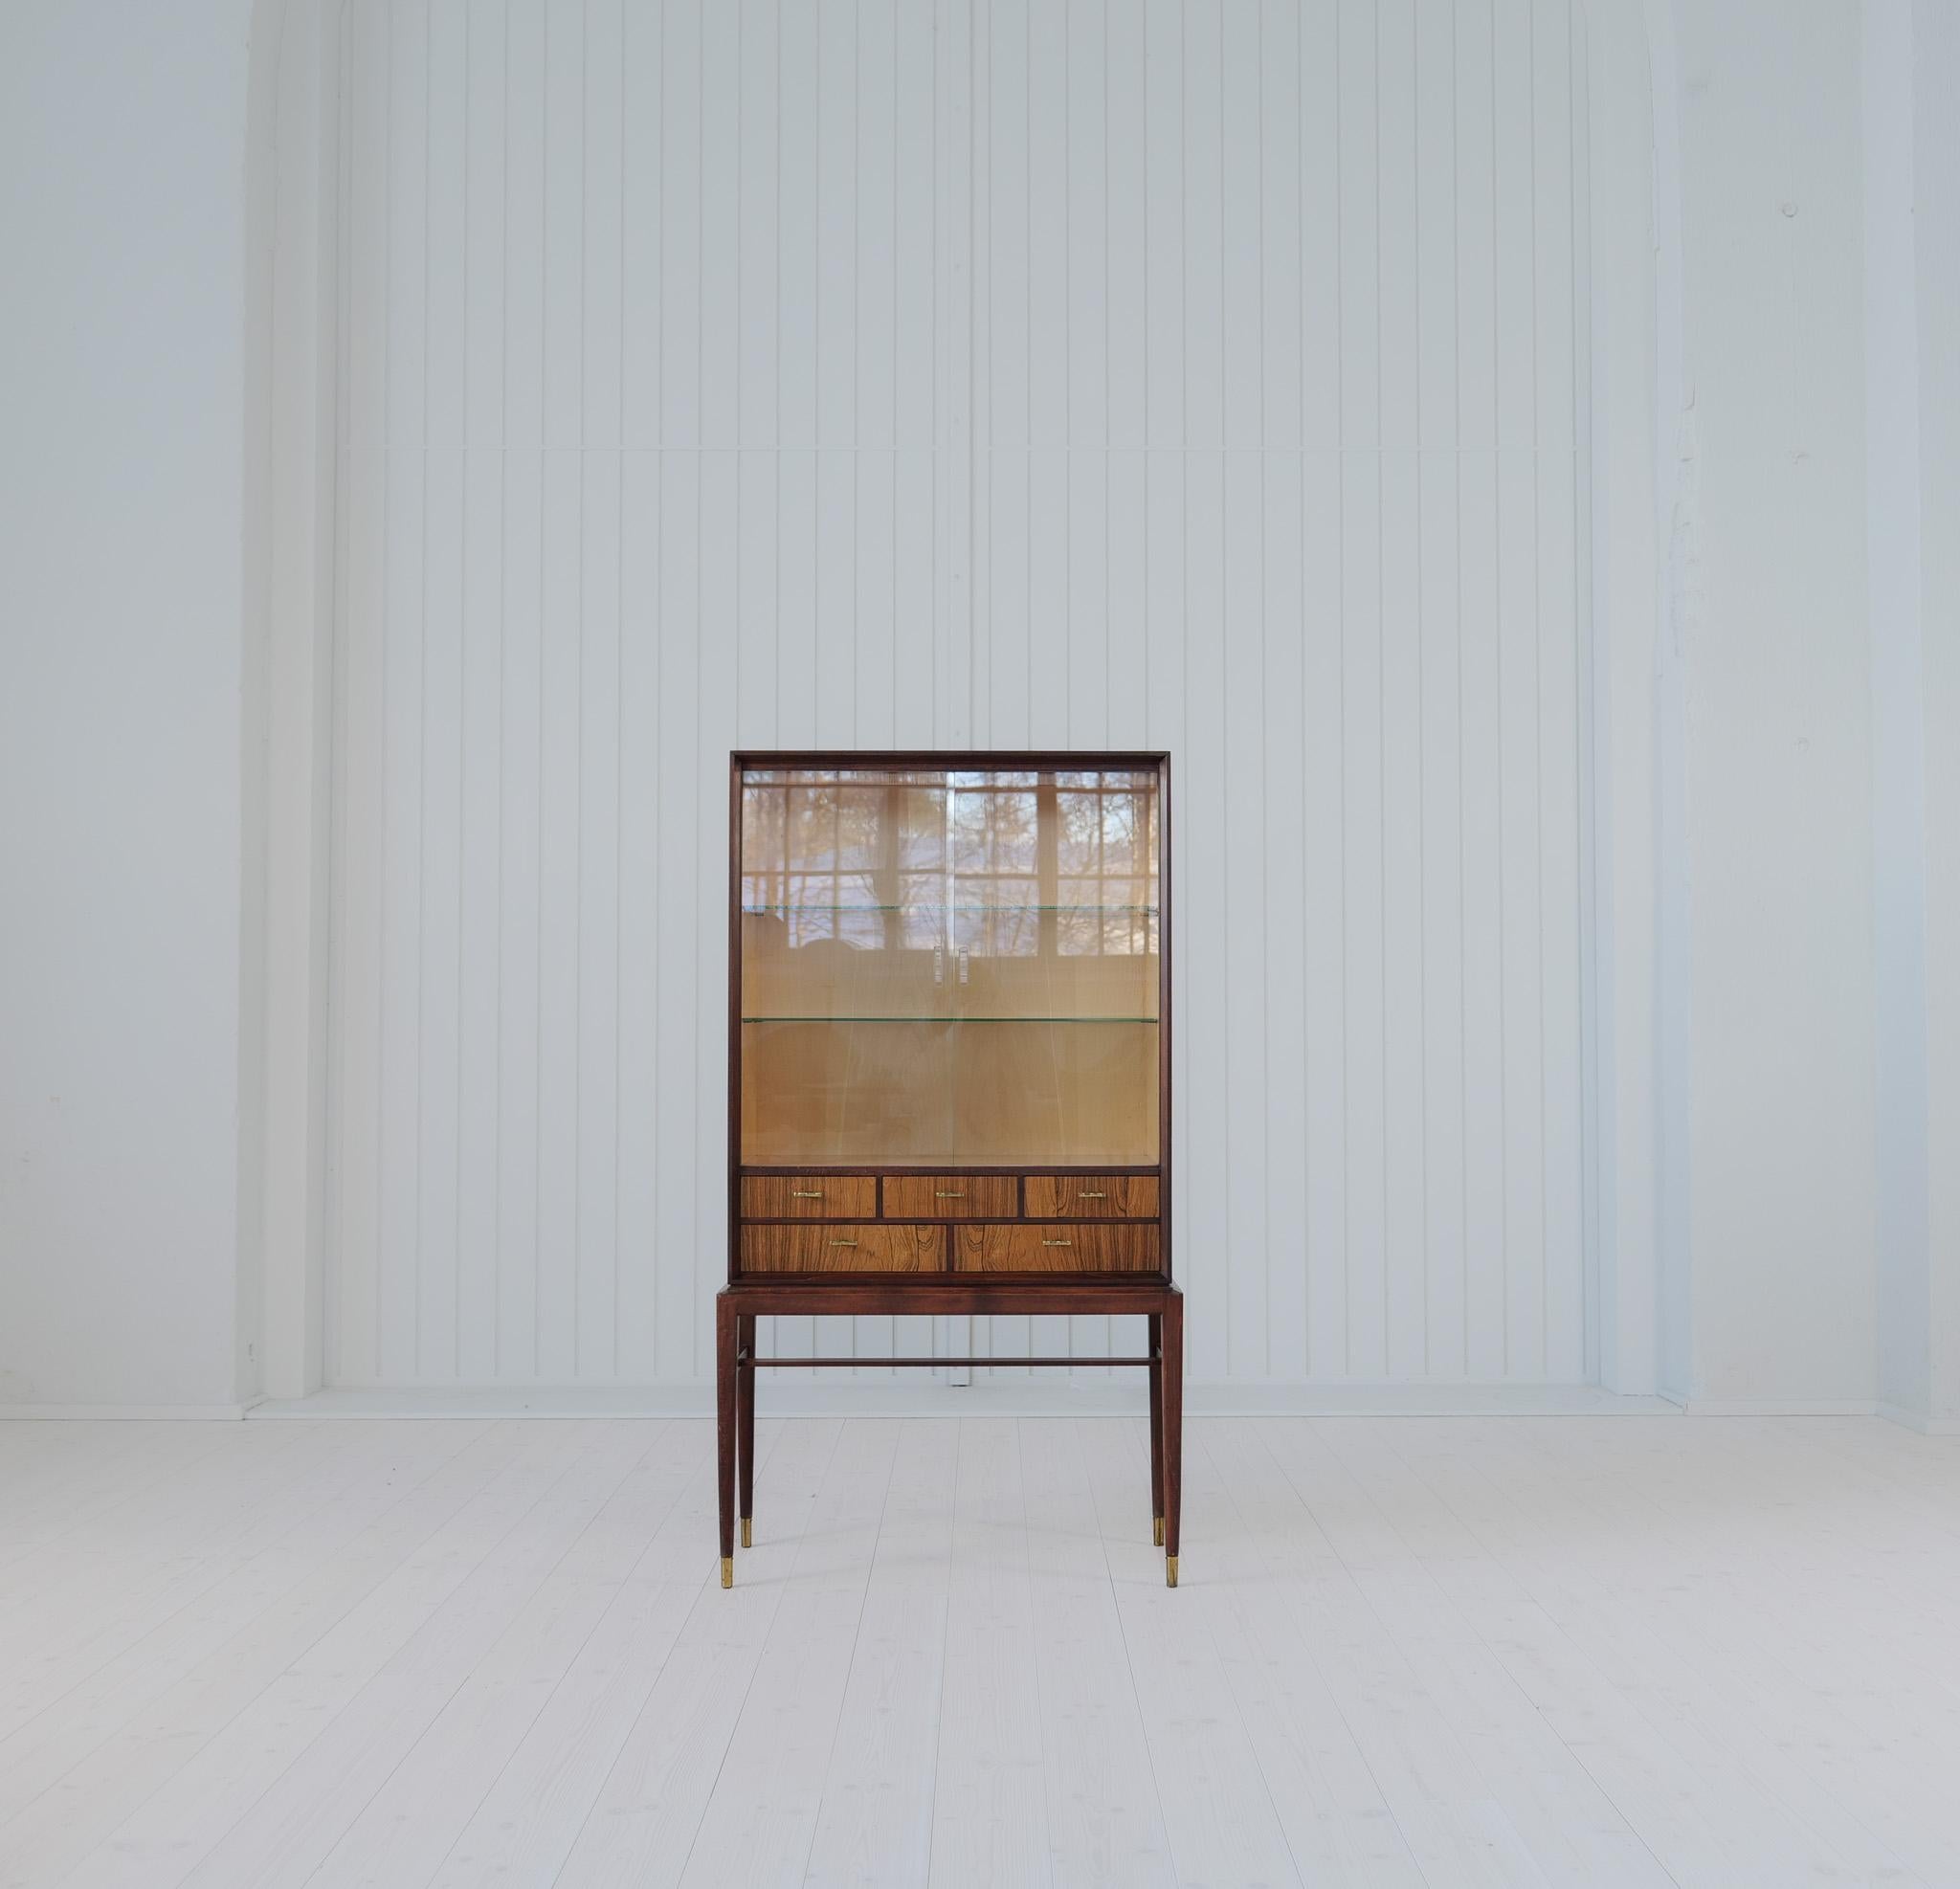 This beautiful cabinet was designed by Svante Skogh for Seffle Möbelfabrik, circa 1959 in Sweden.
This piece features a rosewood and teak frame with two large sliding glass doors and five drawers with handles in brass.

Condition: Good vintage